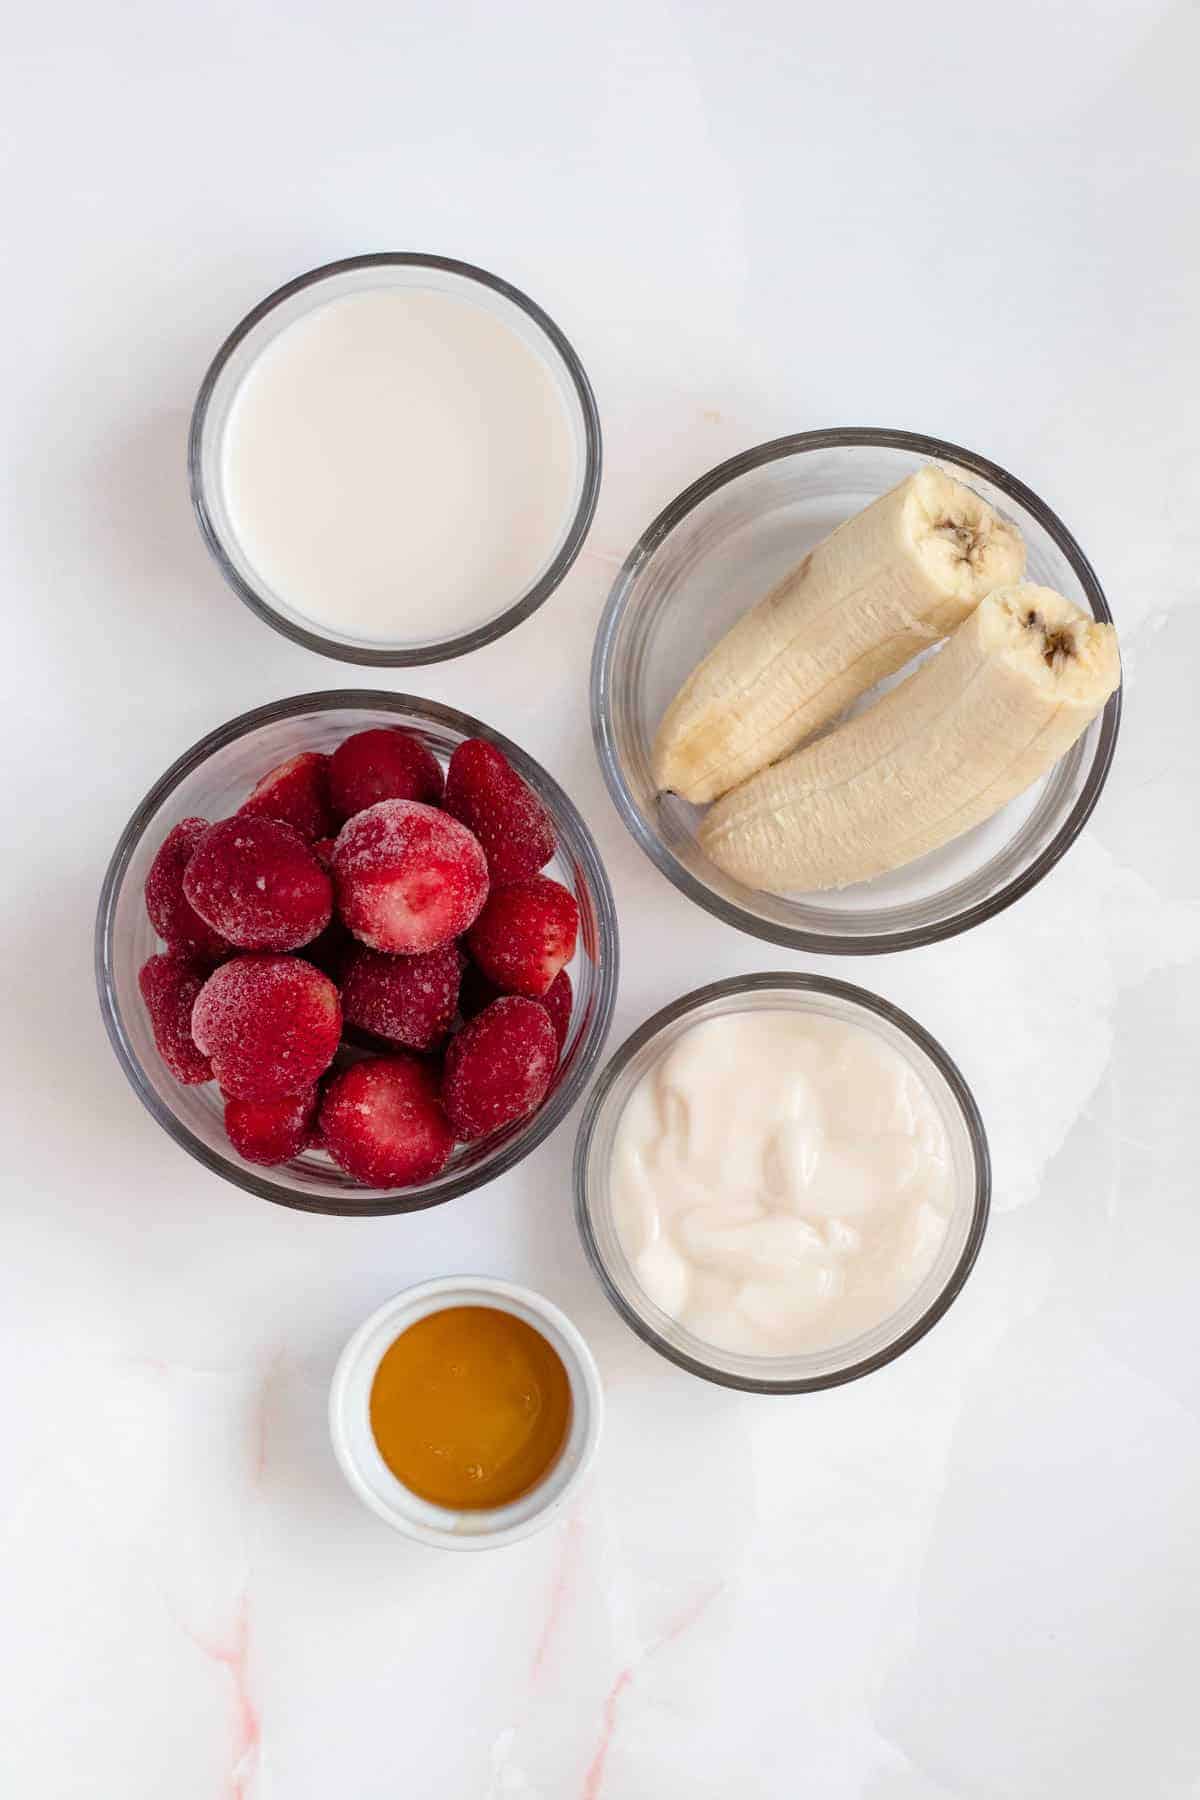 Small glass bowls with recipe ingredients; Frozen Strawberries, Banana, Almond Milk, Yogurt, and Honey on a white background